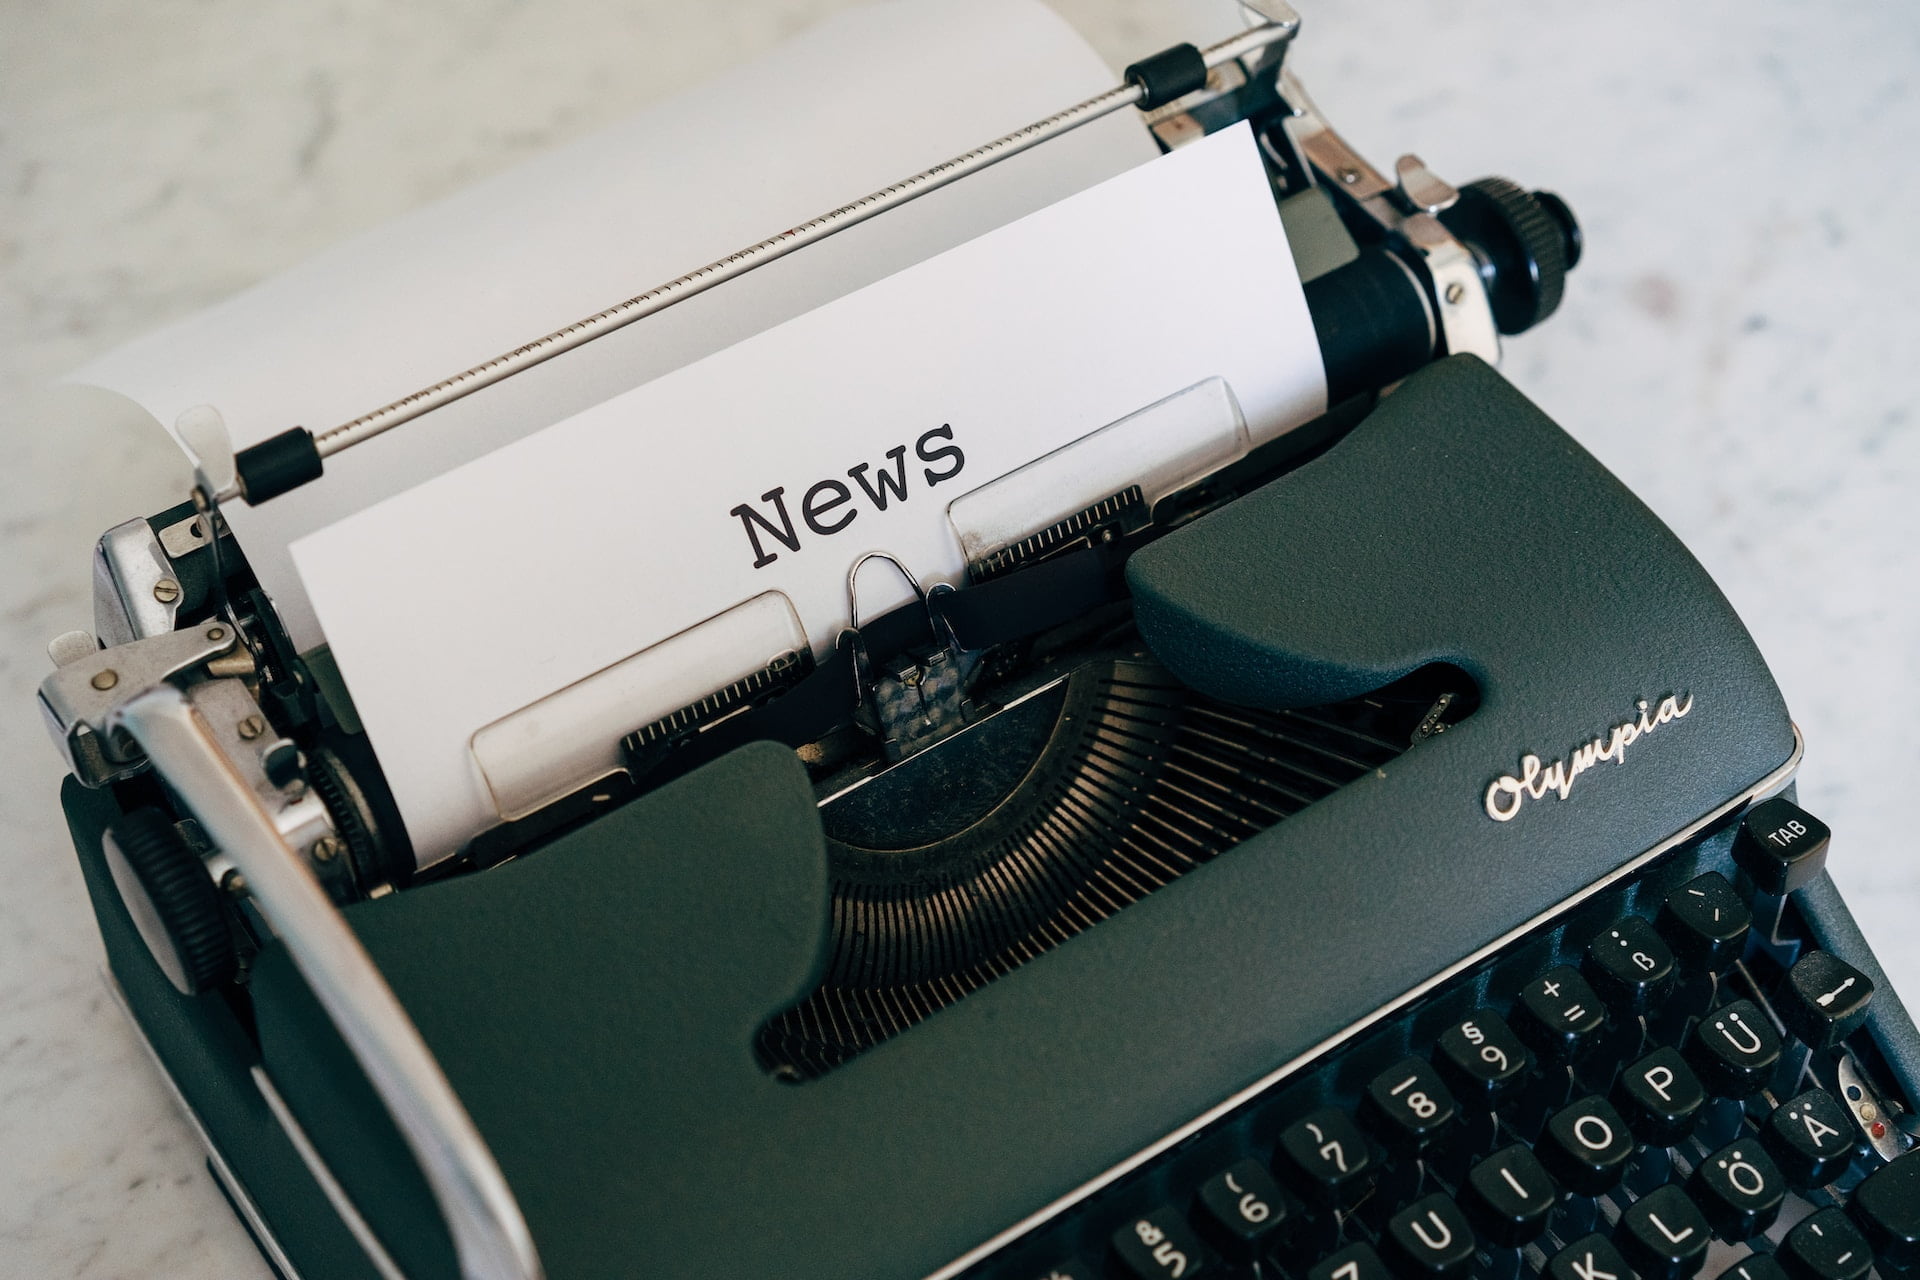 Depicts a typewriter with a piece of paper that says "News" on it. Used as a cover image for an article covering alternative investment news.